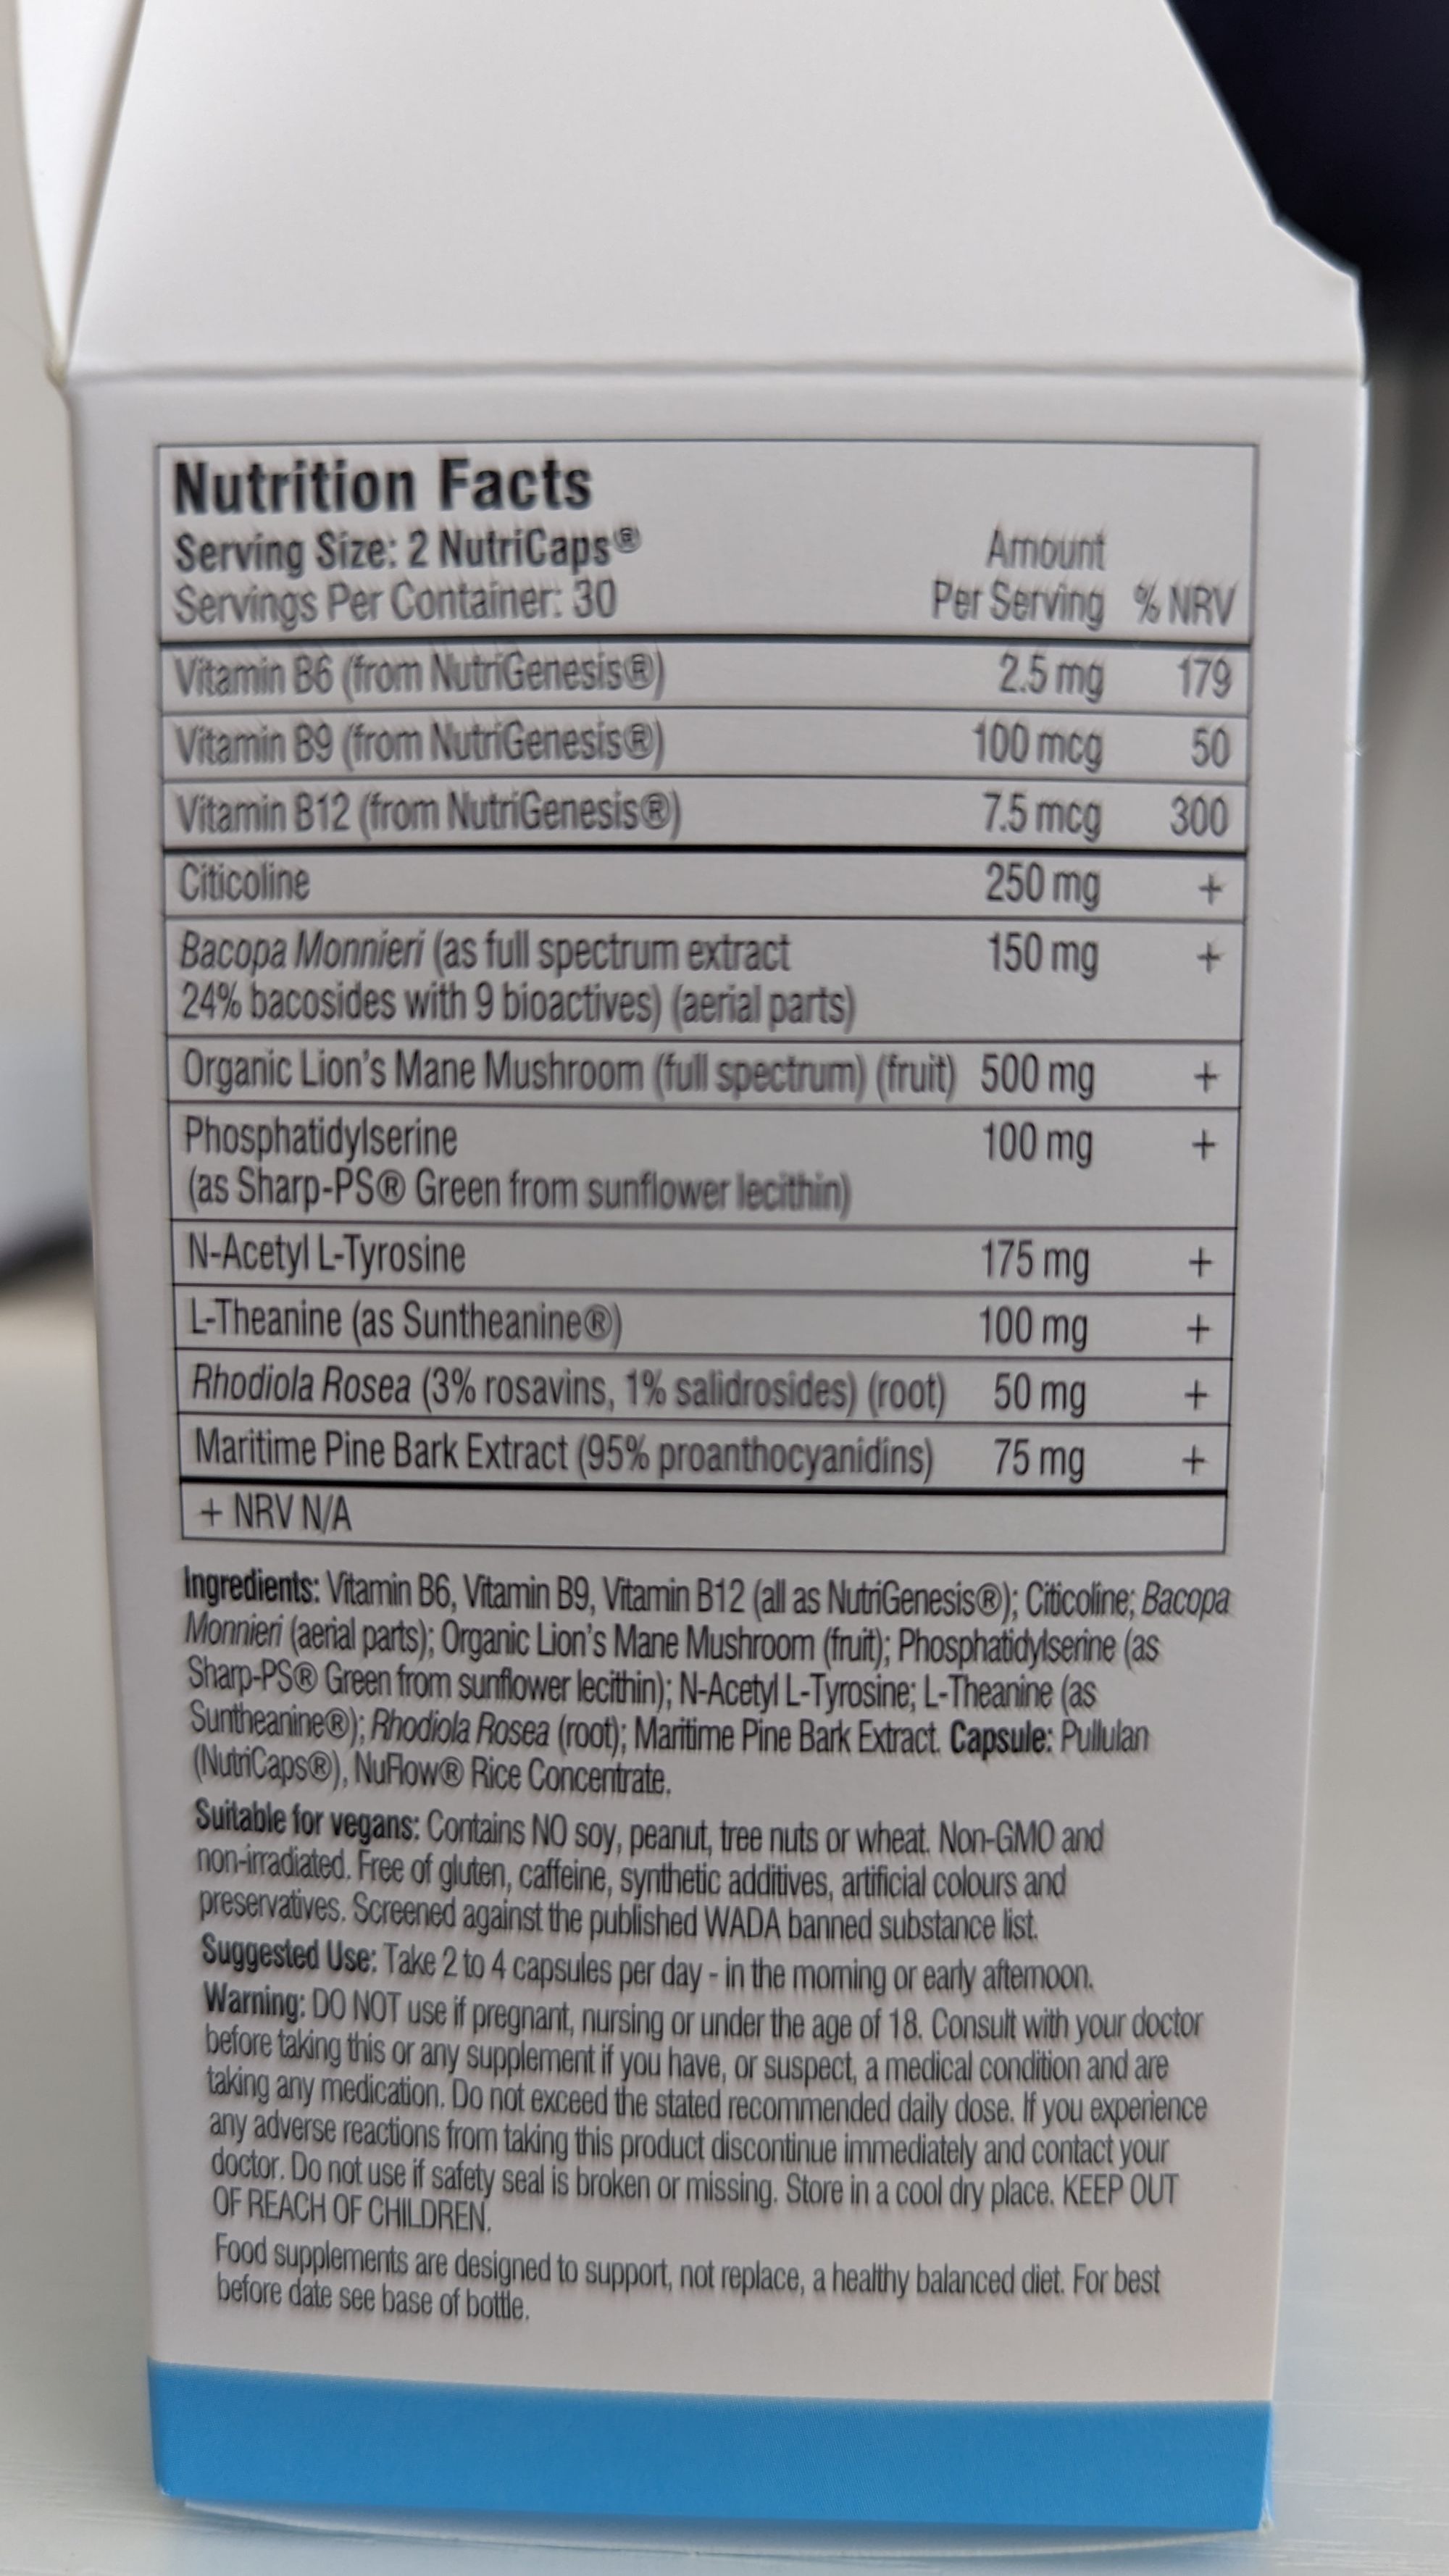 Mind Lab Pro's ingredients on the box label.